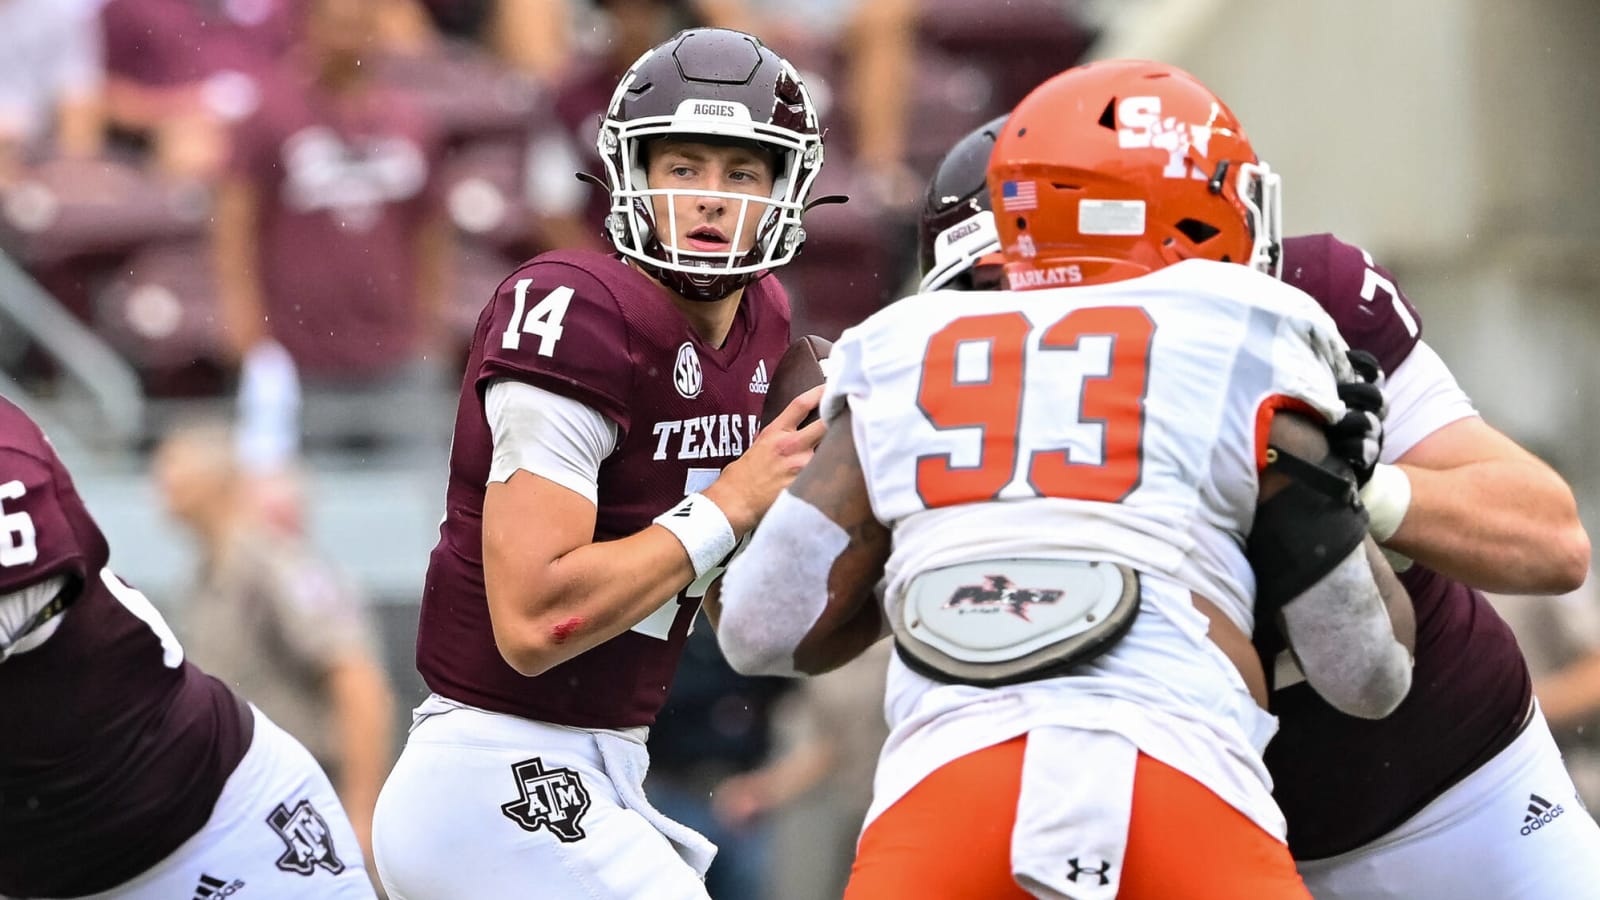 Texas A&M to make change at QB following loss to Appalachian State